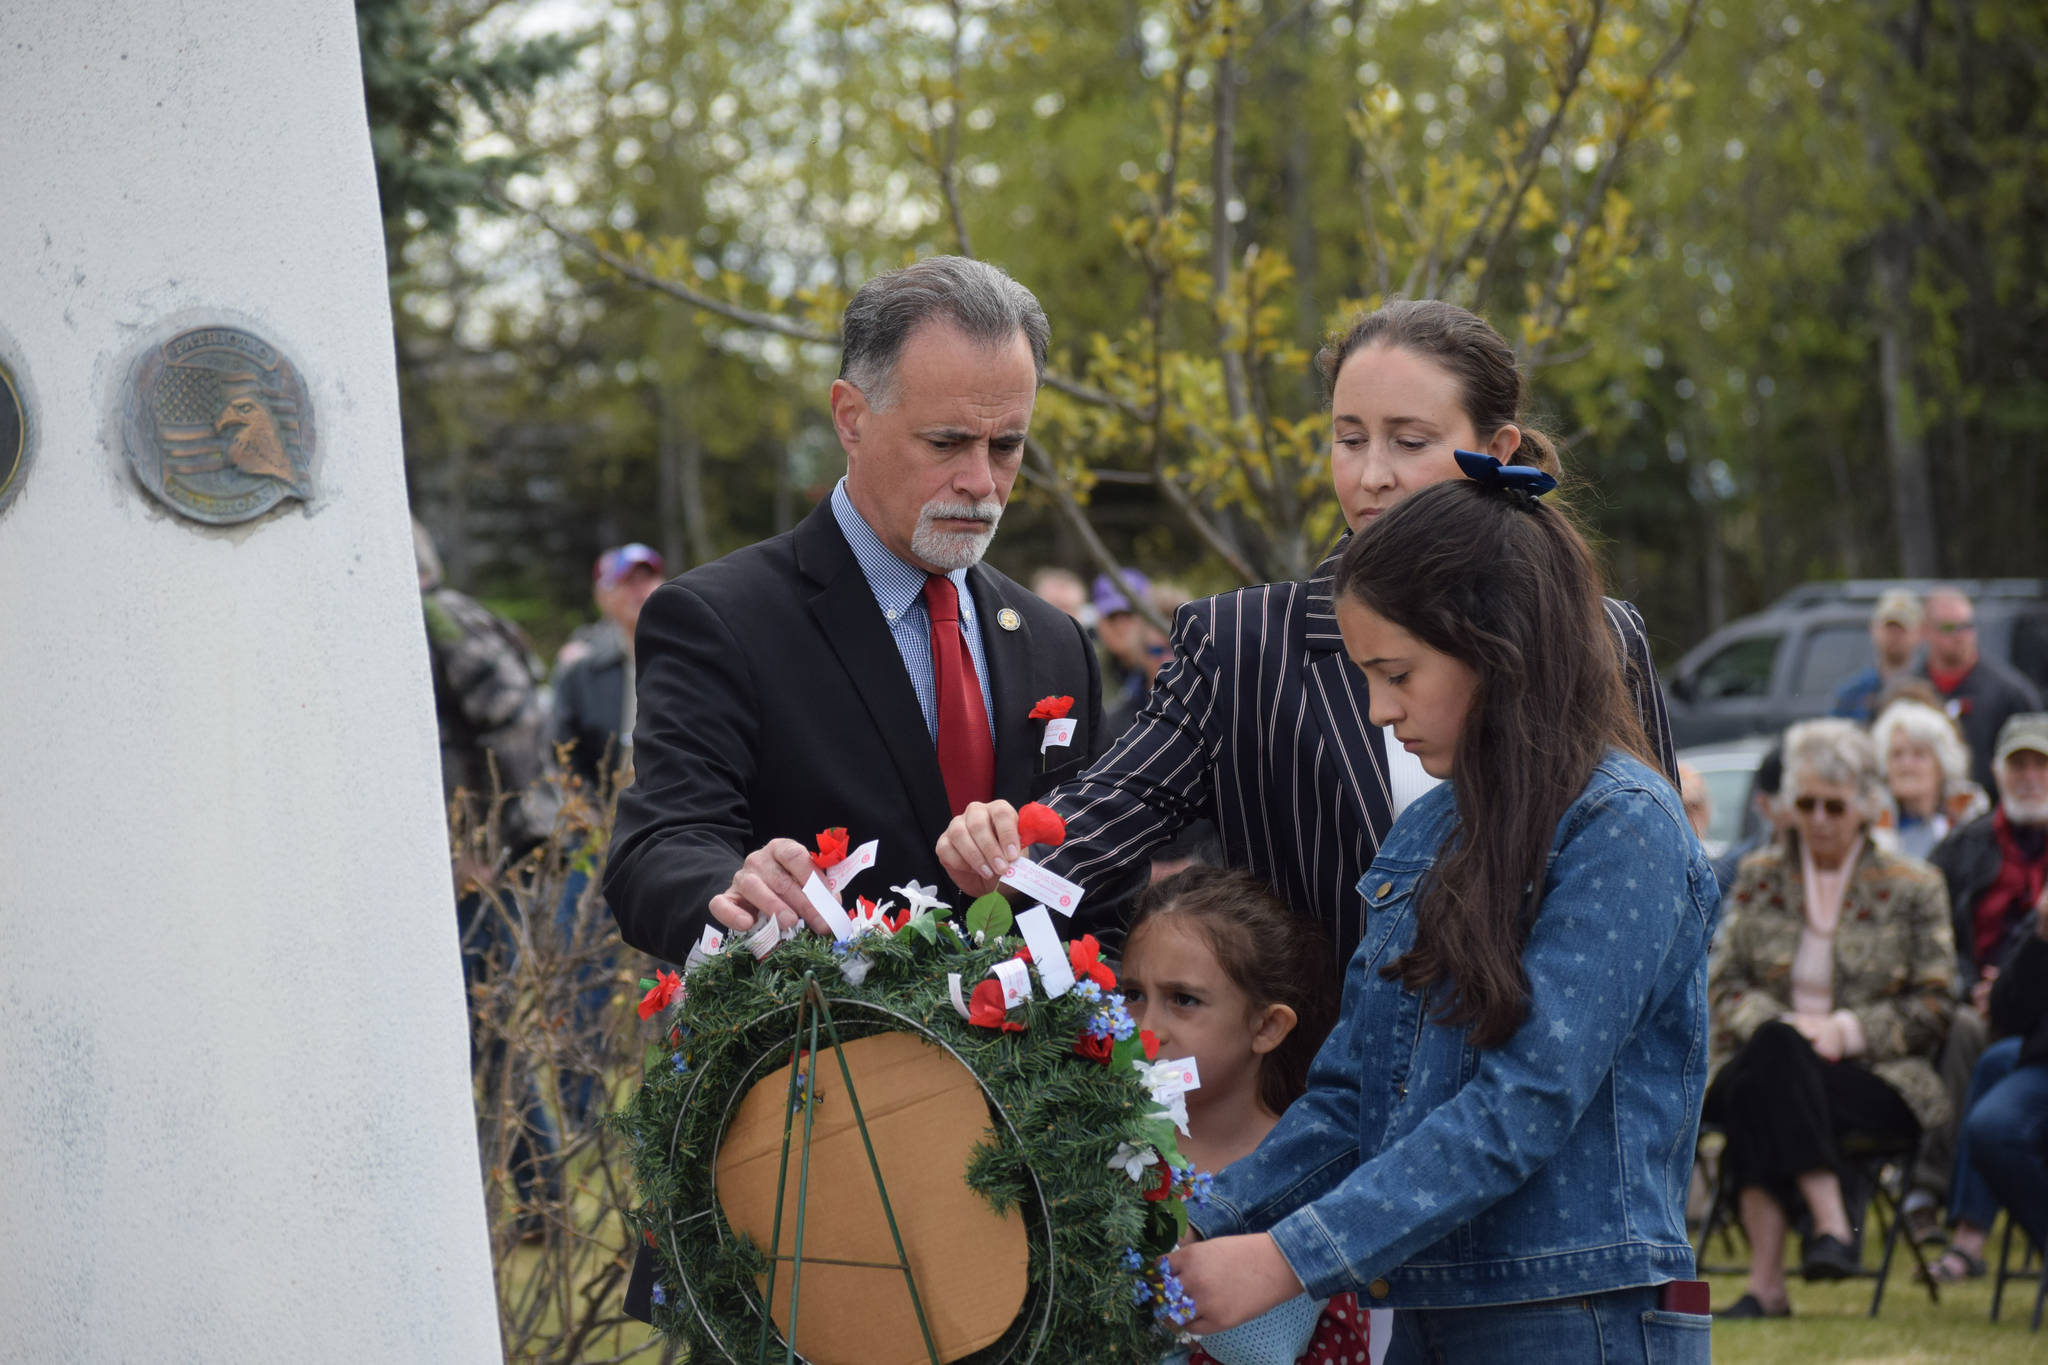 Alaska Senate President Peter Micciche (R-Soldotna) lays a poppy flower on a remberance wreath with his family during the Memorial Day ceremony at Leif Hansen Memorial Park on Monday, May 31, 2021. (Camille Botello / Peninsula Clarion)